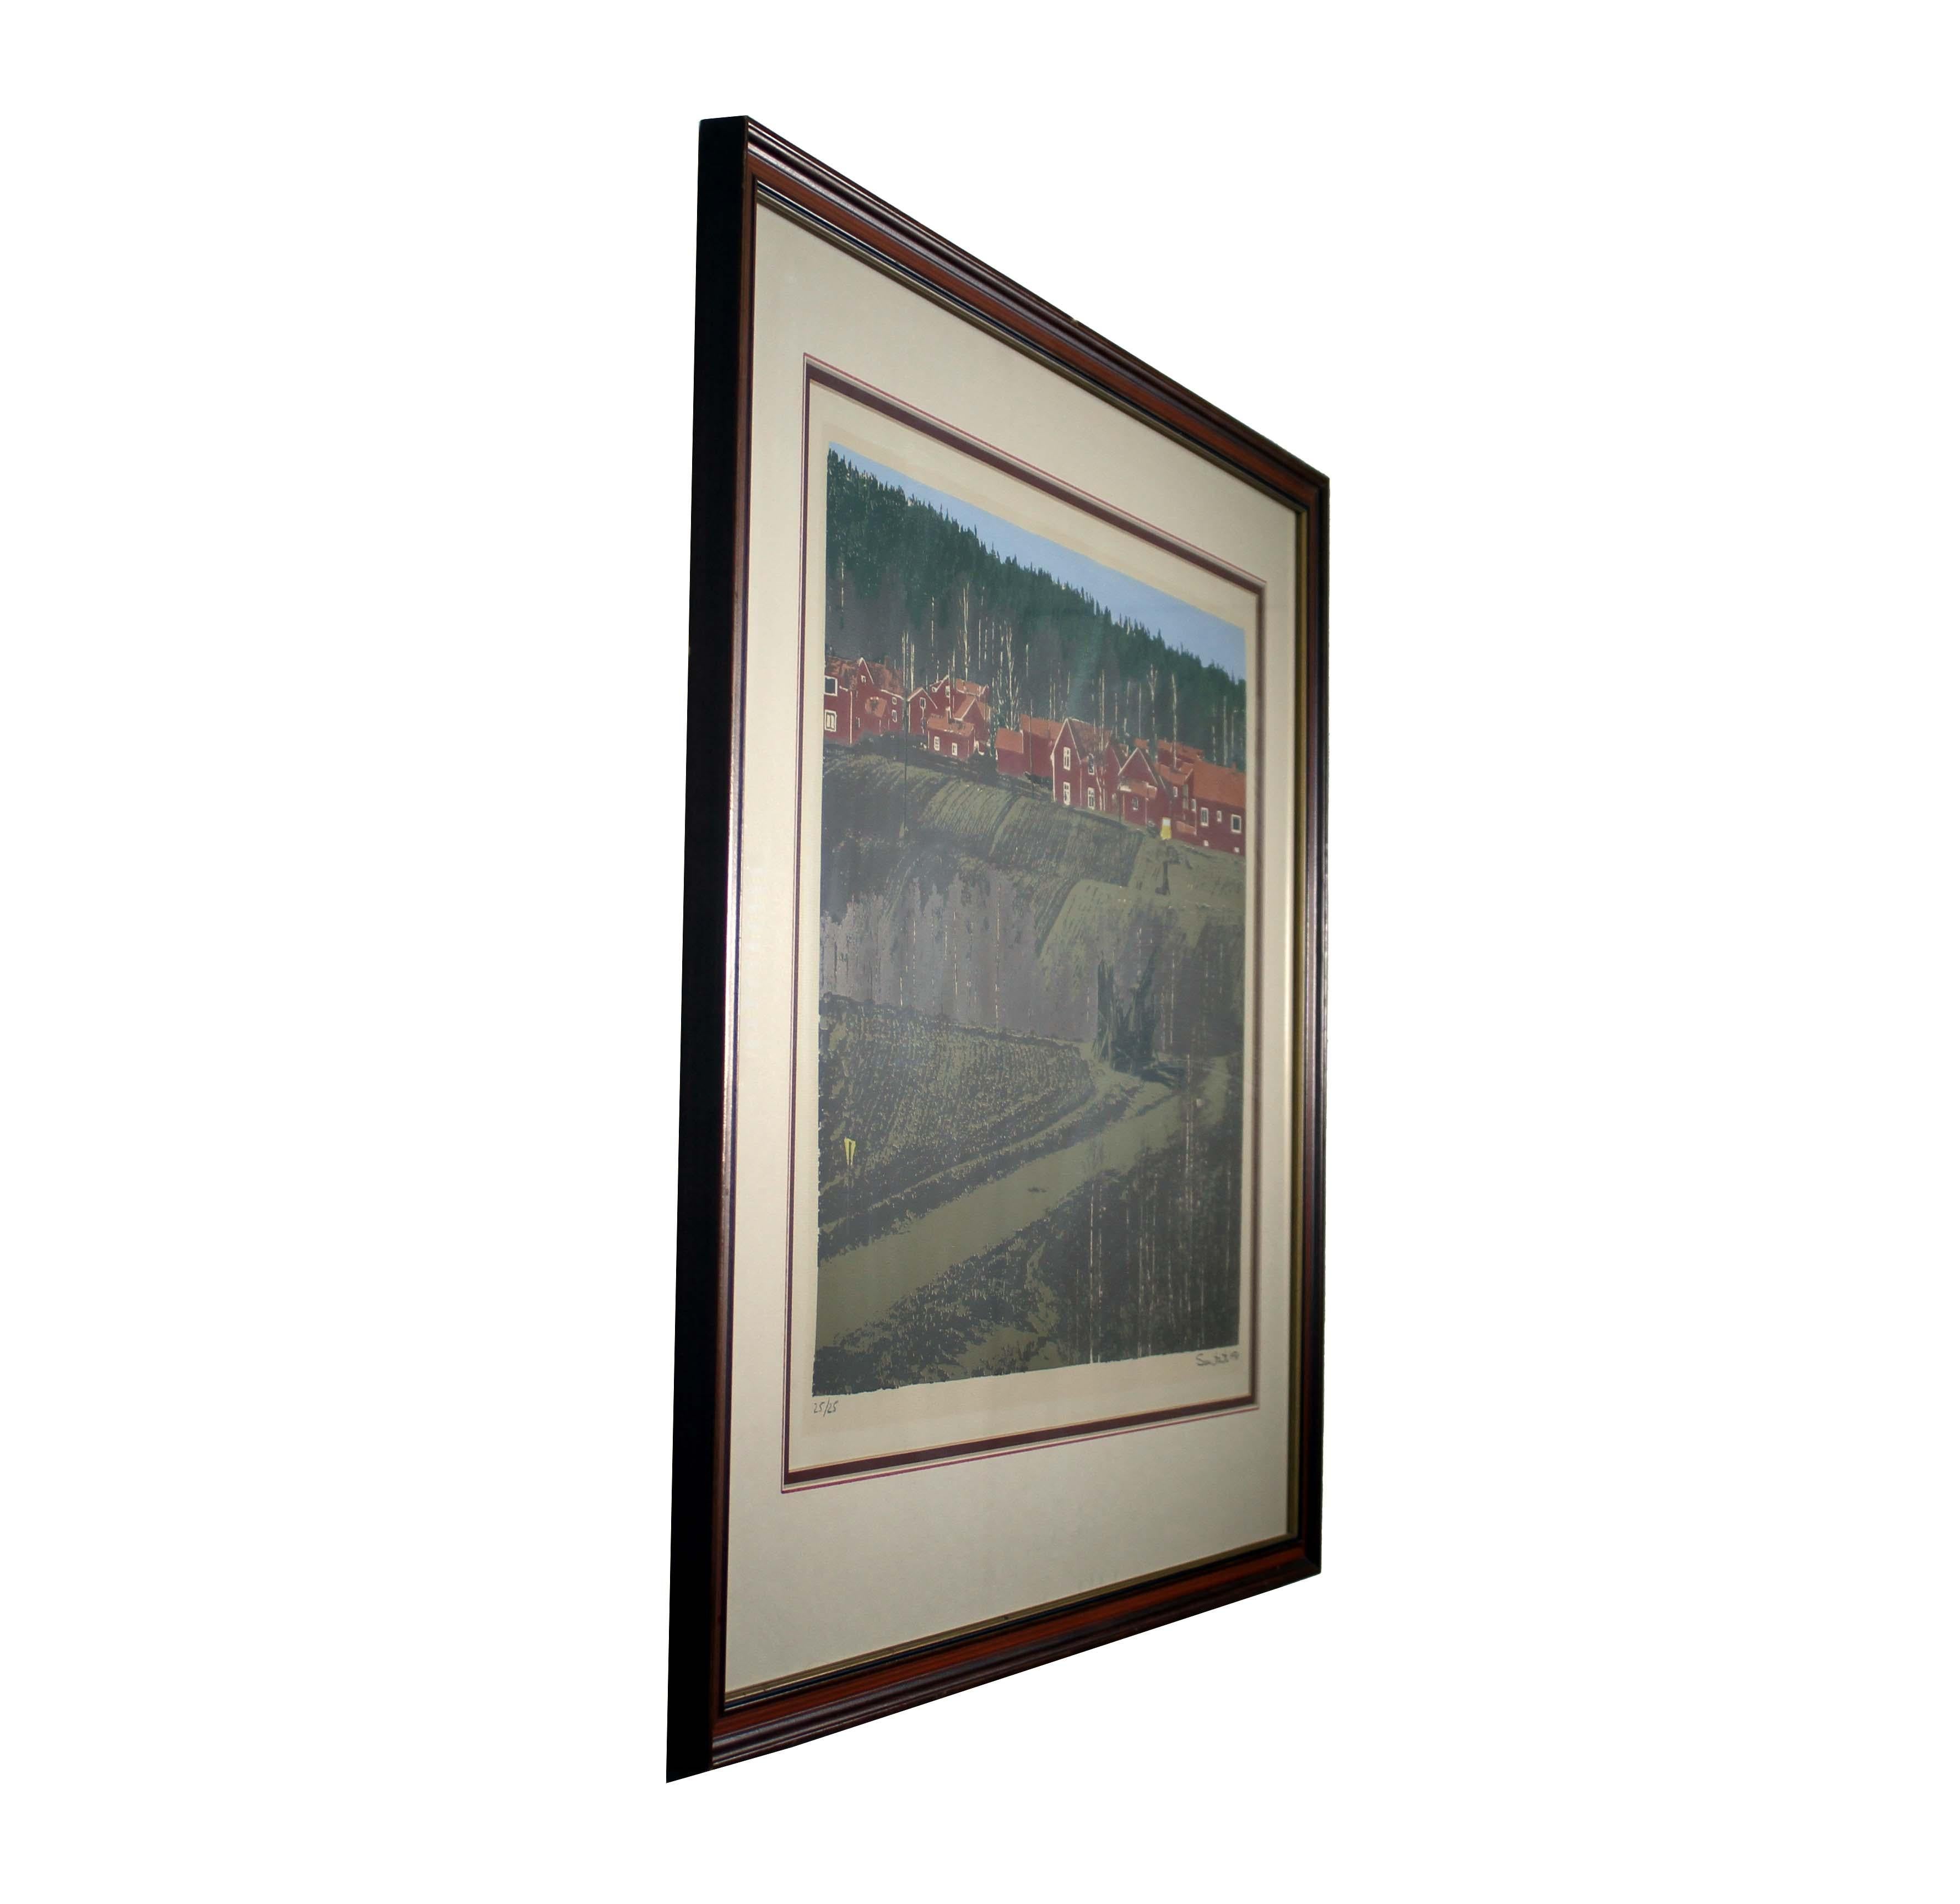 Giovanni Sanvitale Signed Contemporary Barn Houses Lithograph 25/25 Framed 1978 In Good Condition For Sale In Keego Harbor, MI